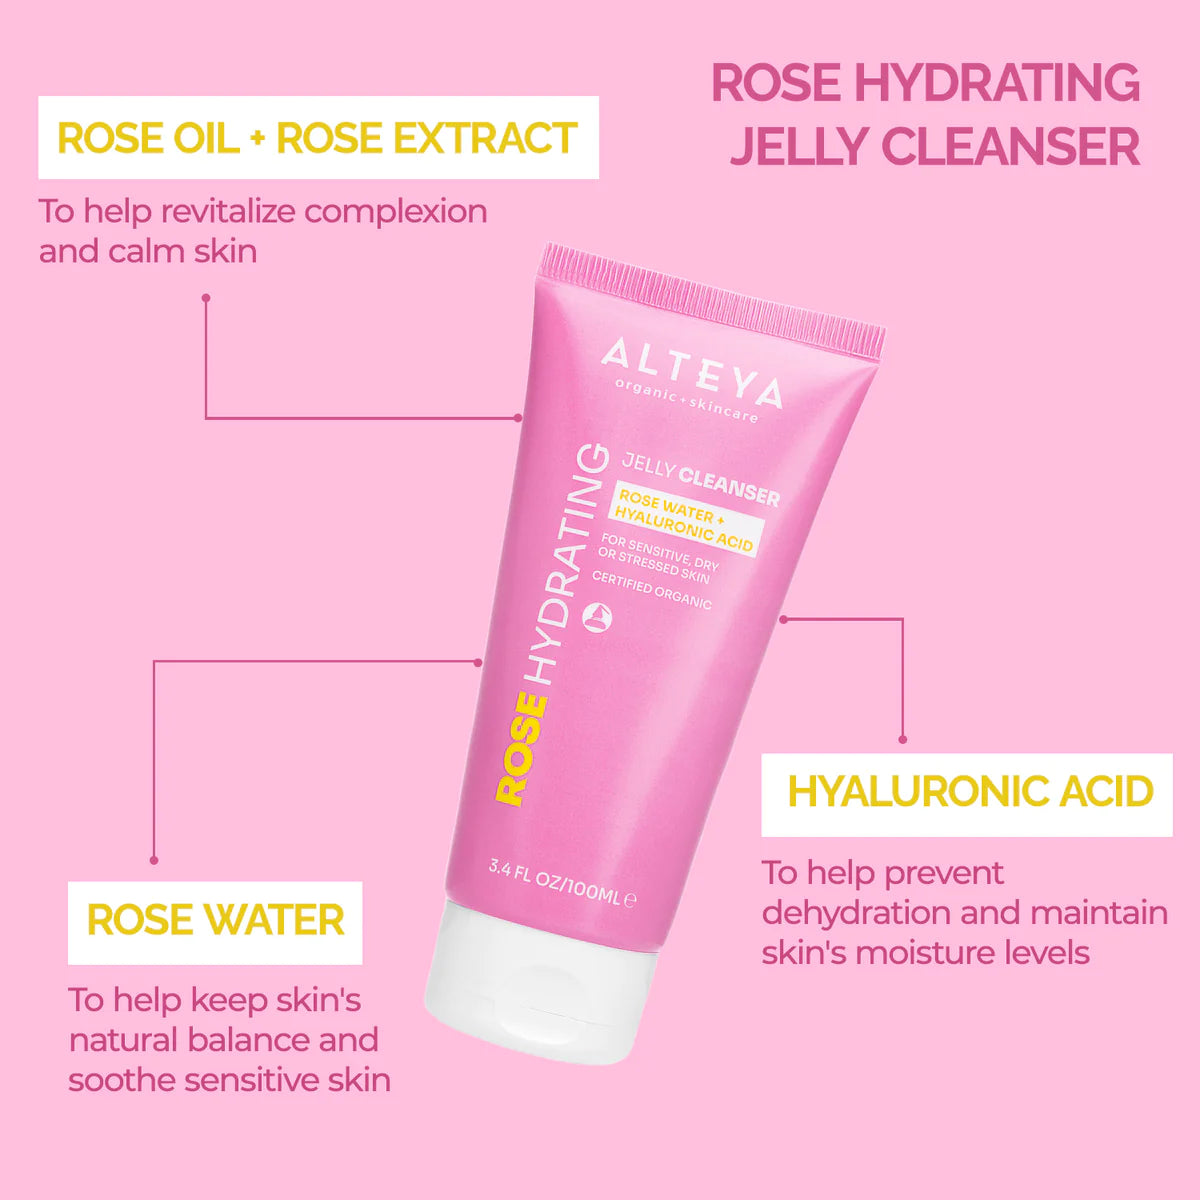 The Alteya Organics Rose Hydrating Jelly Cleanser is enriched with organic rose water and hyaluronic acid, ensuring deep hydration and a refreshing cleansing experience.